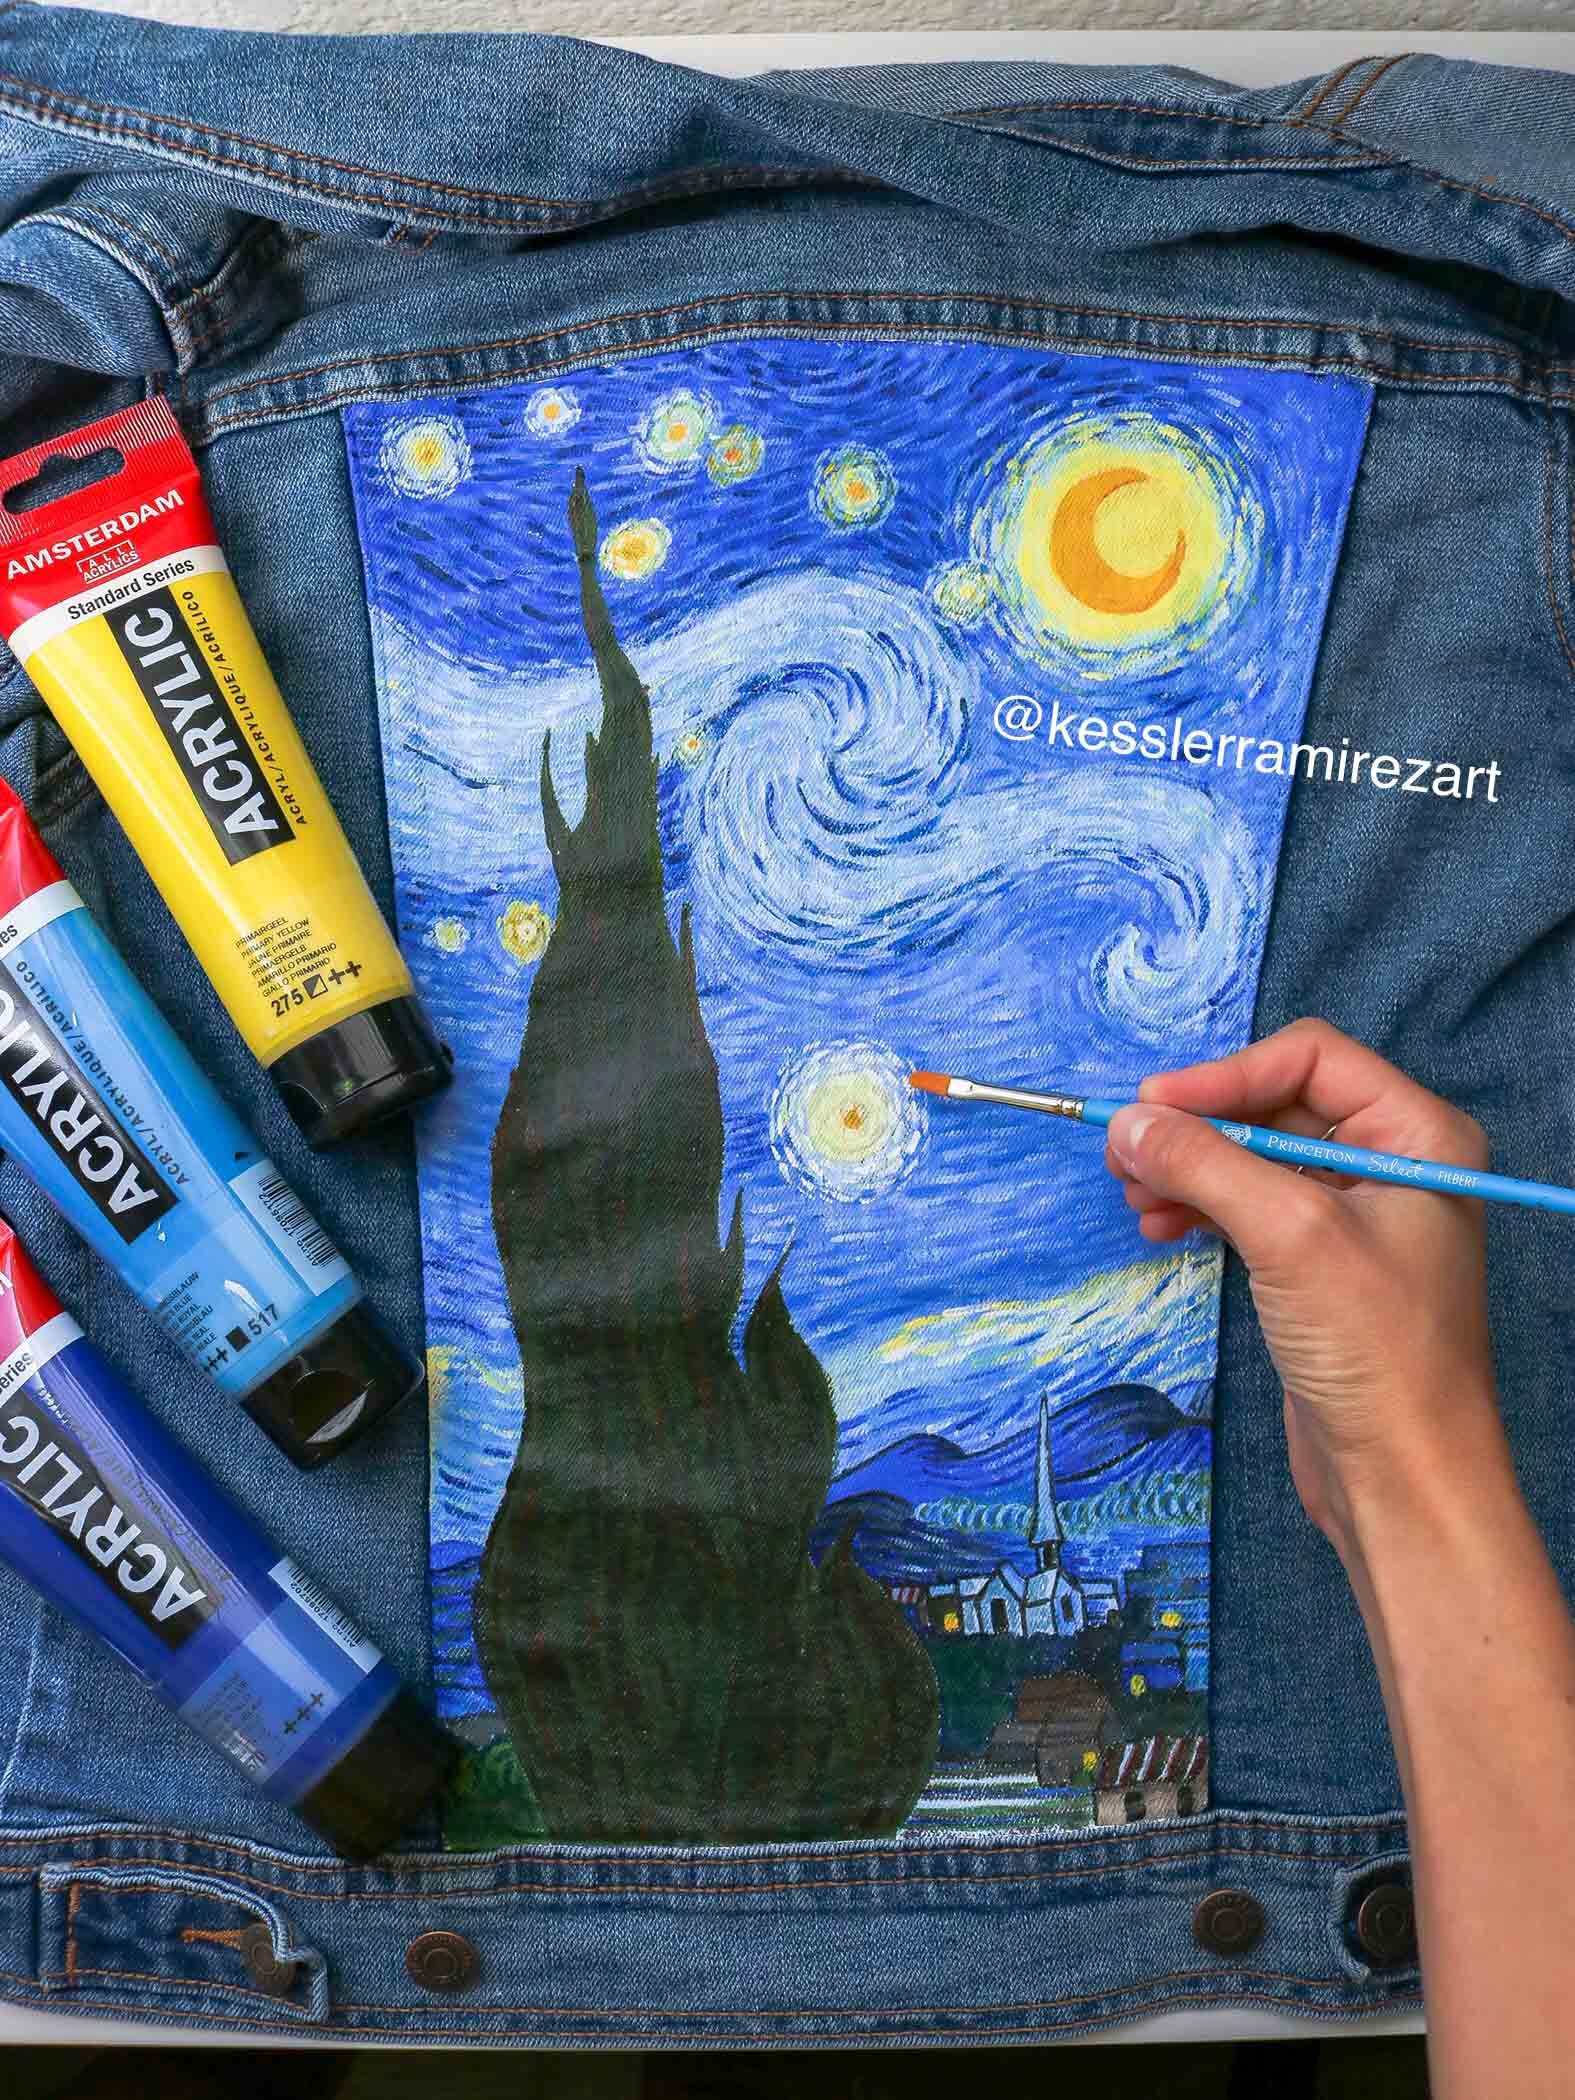 Testing Acrylic & Fabric Paints on Denim - Made By Barb - surprising result